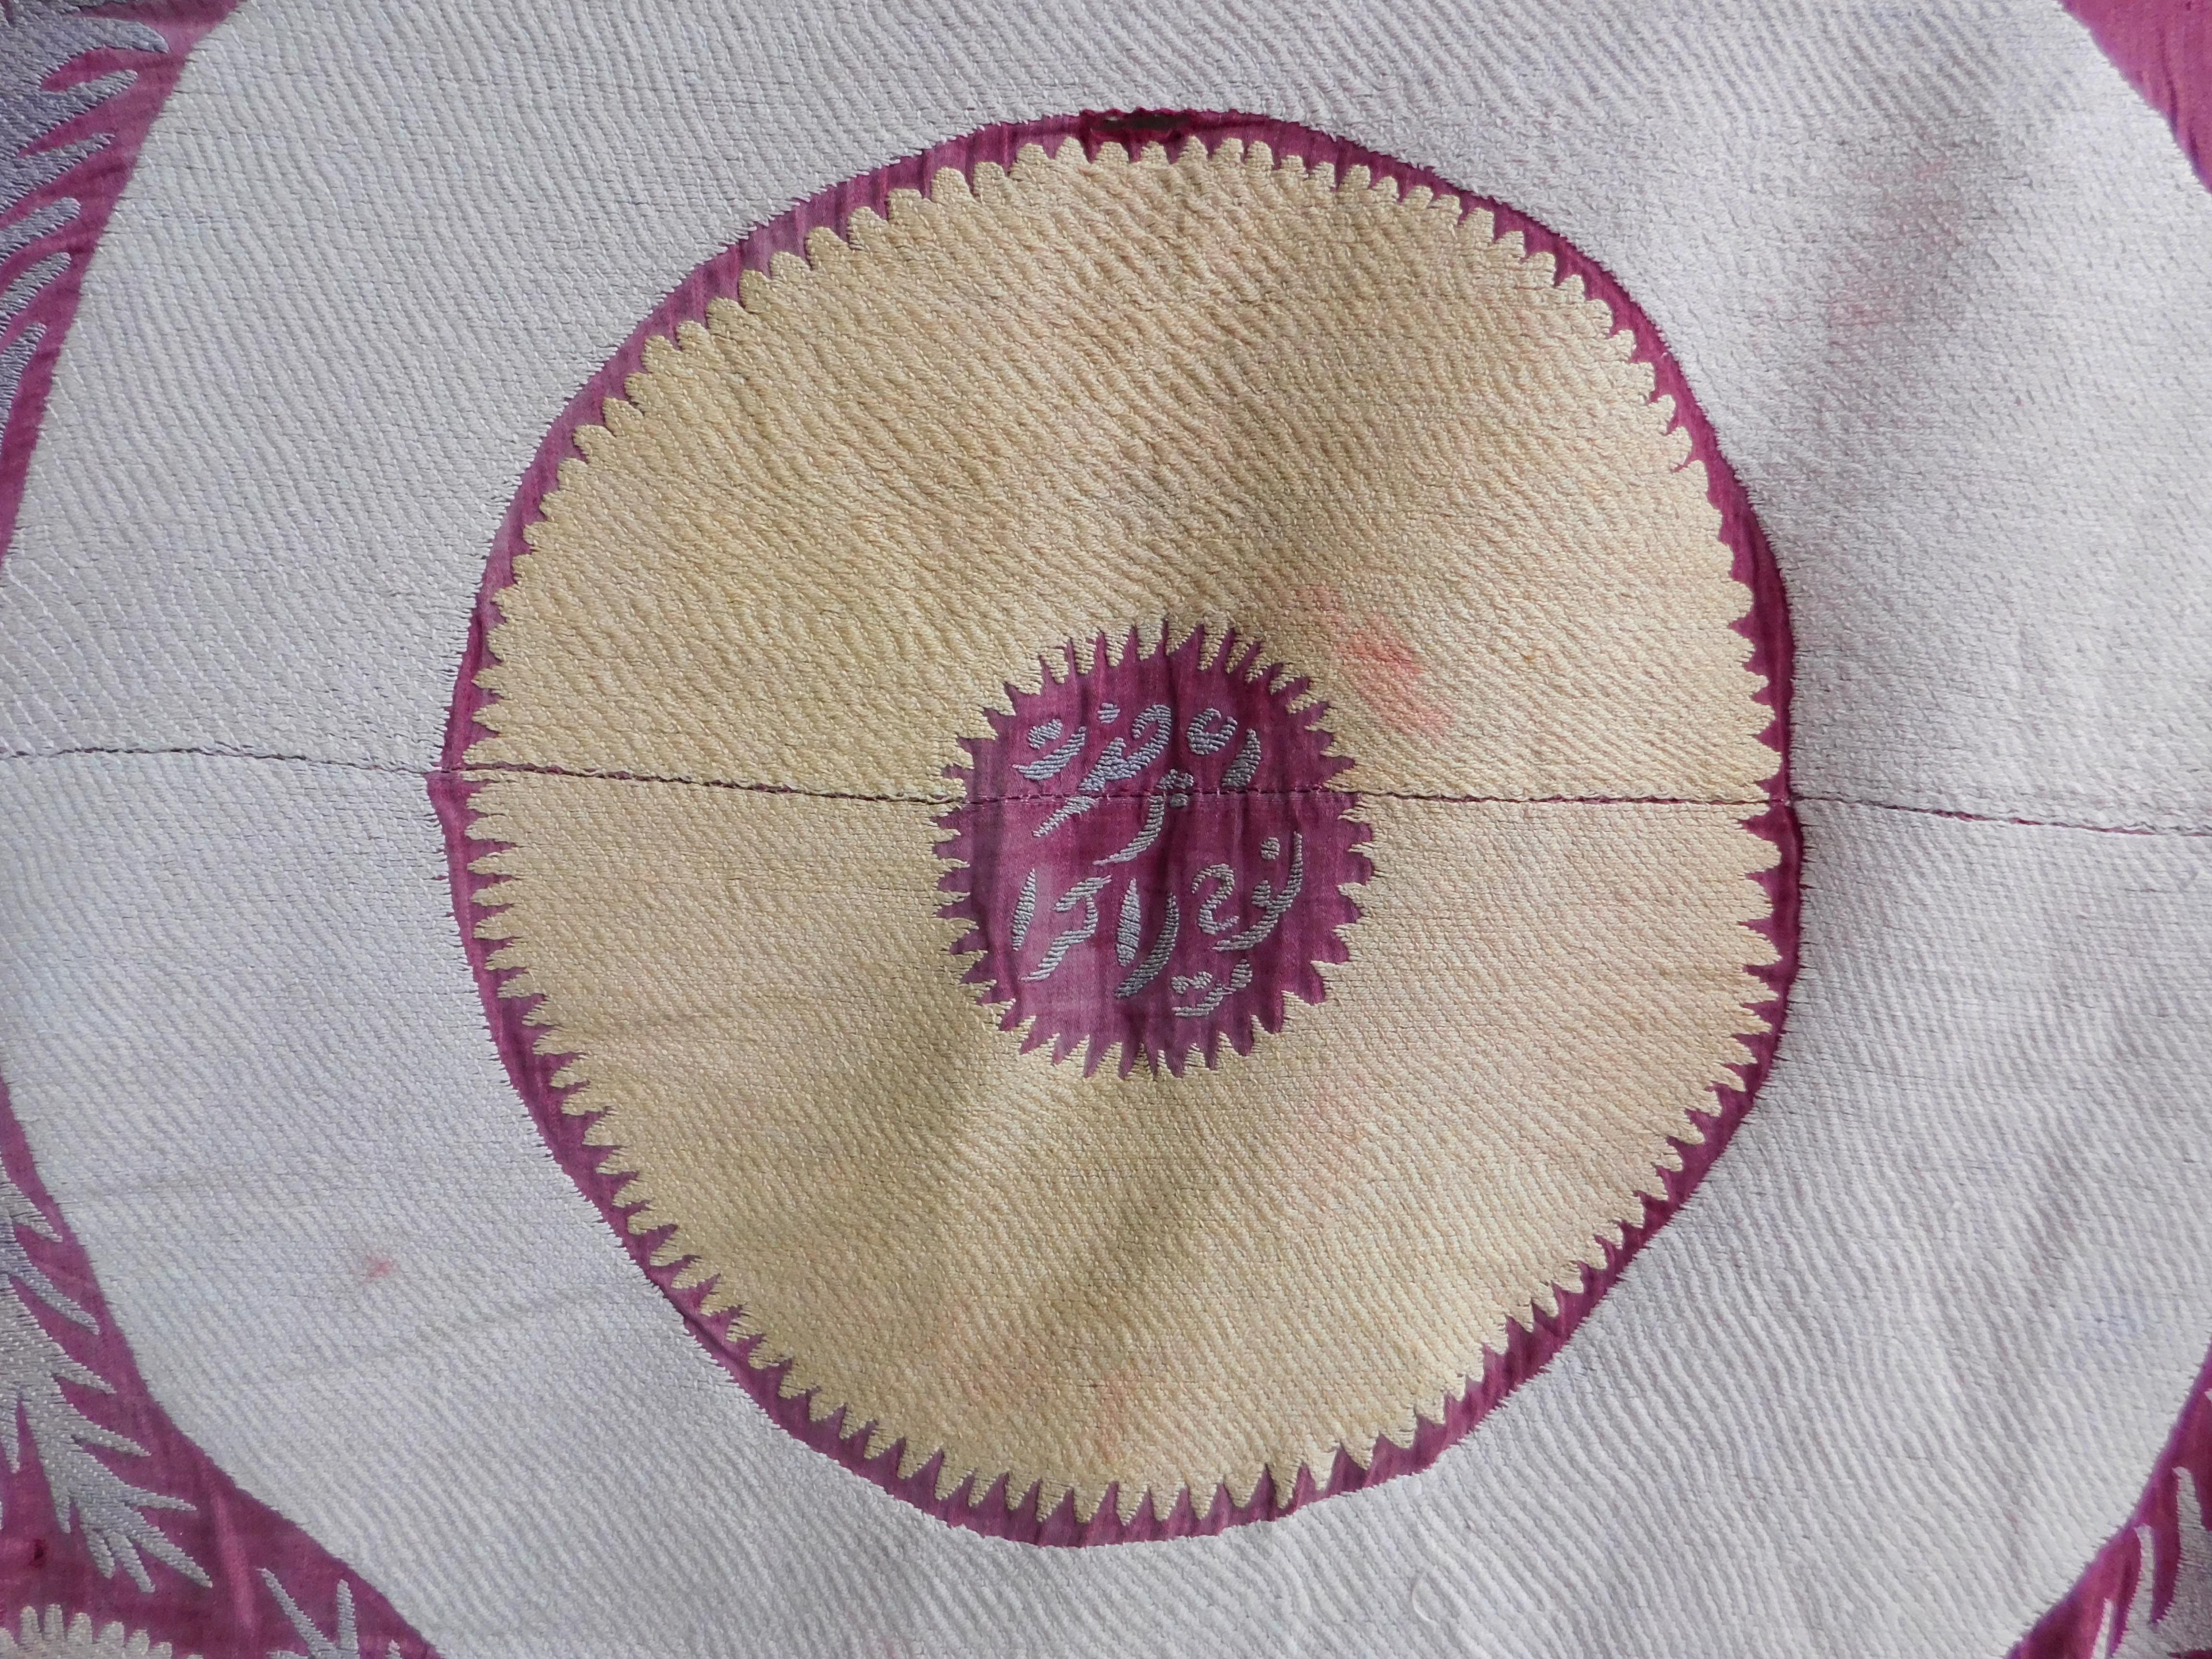  Suzani Samerand Wall Hanging Tapestry Raspberry, Peach and Lavender Embroidery im Angebot 3